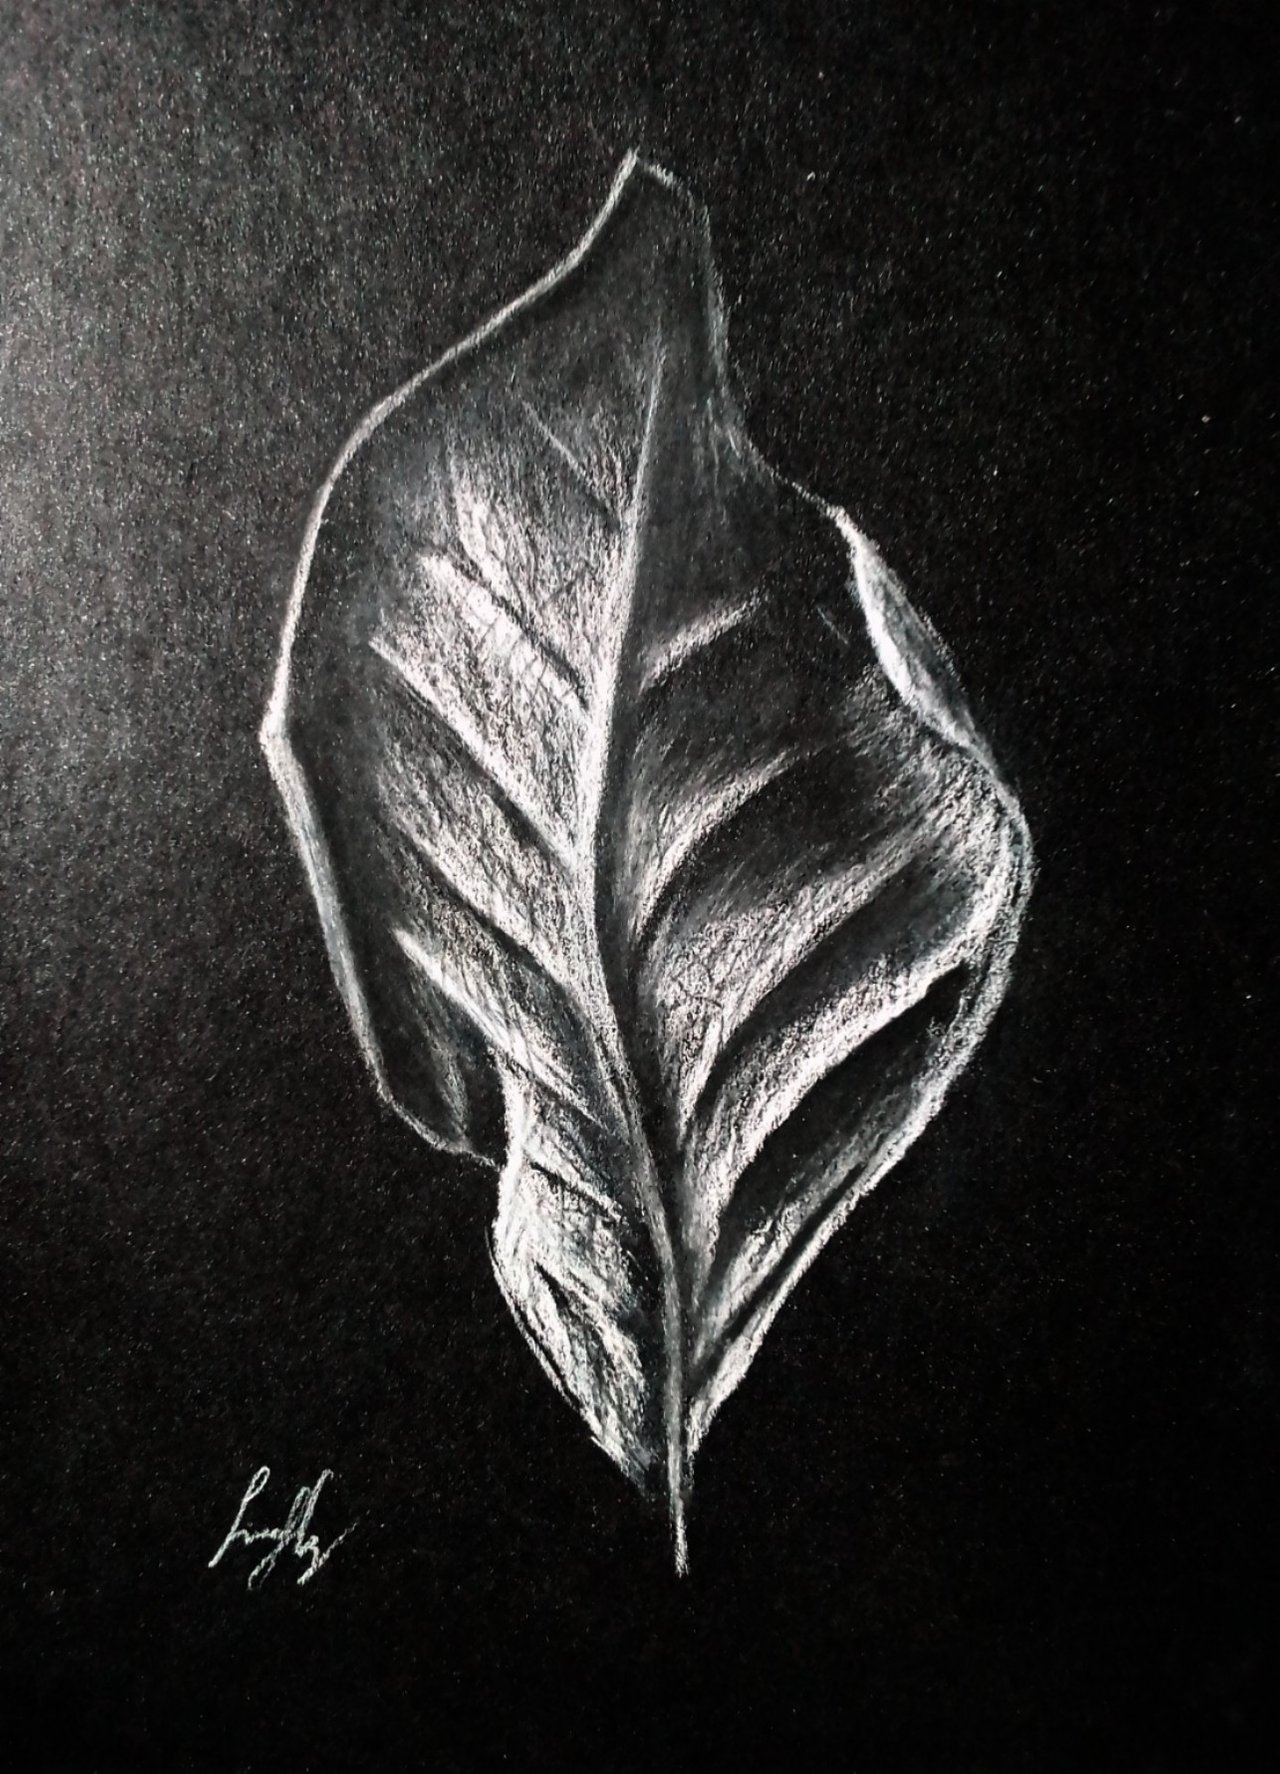 How To Draw A Leaf On Black Paper With White Charcoal